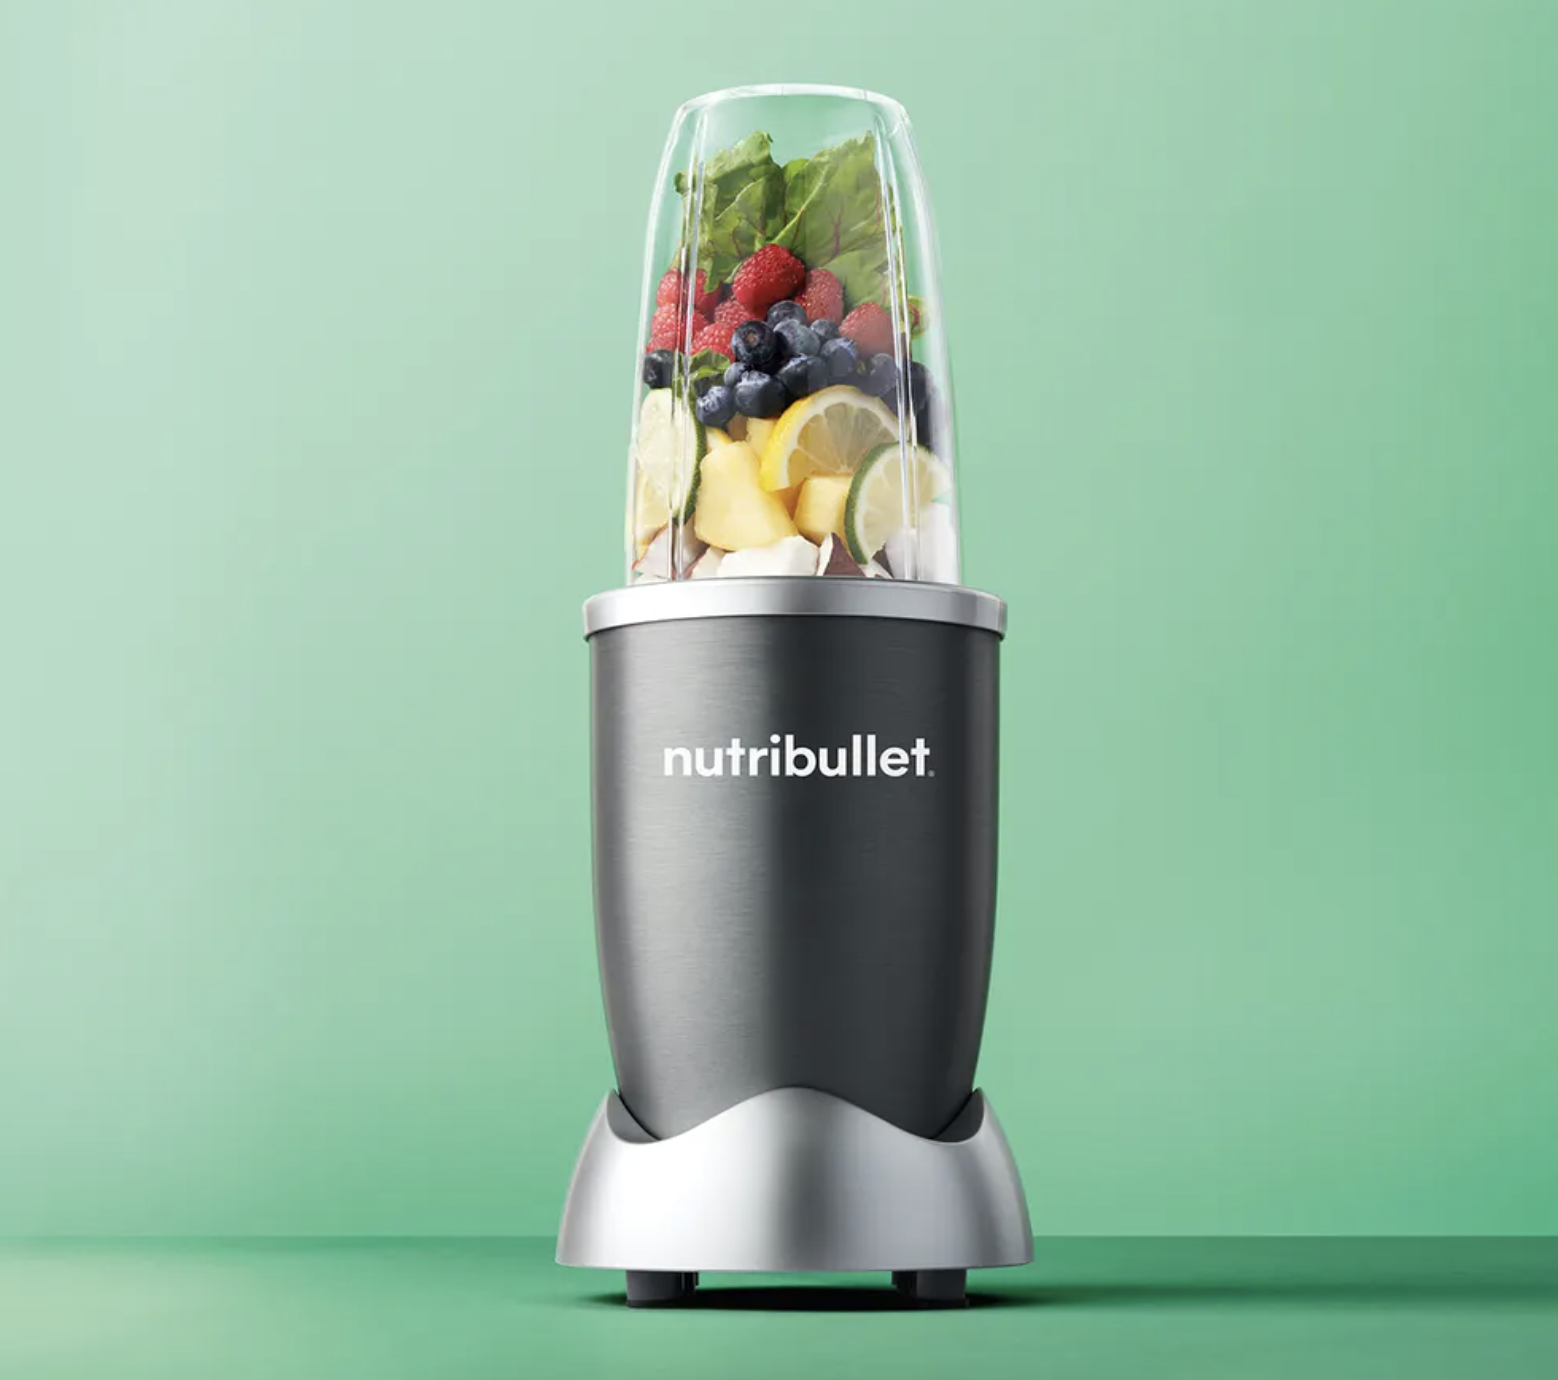 The blender is shown